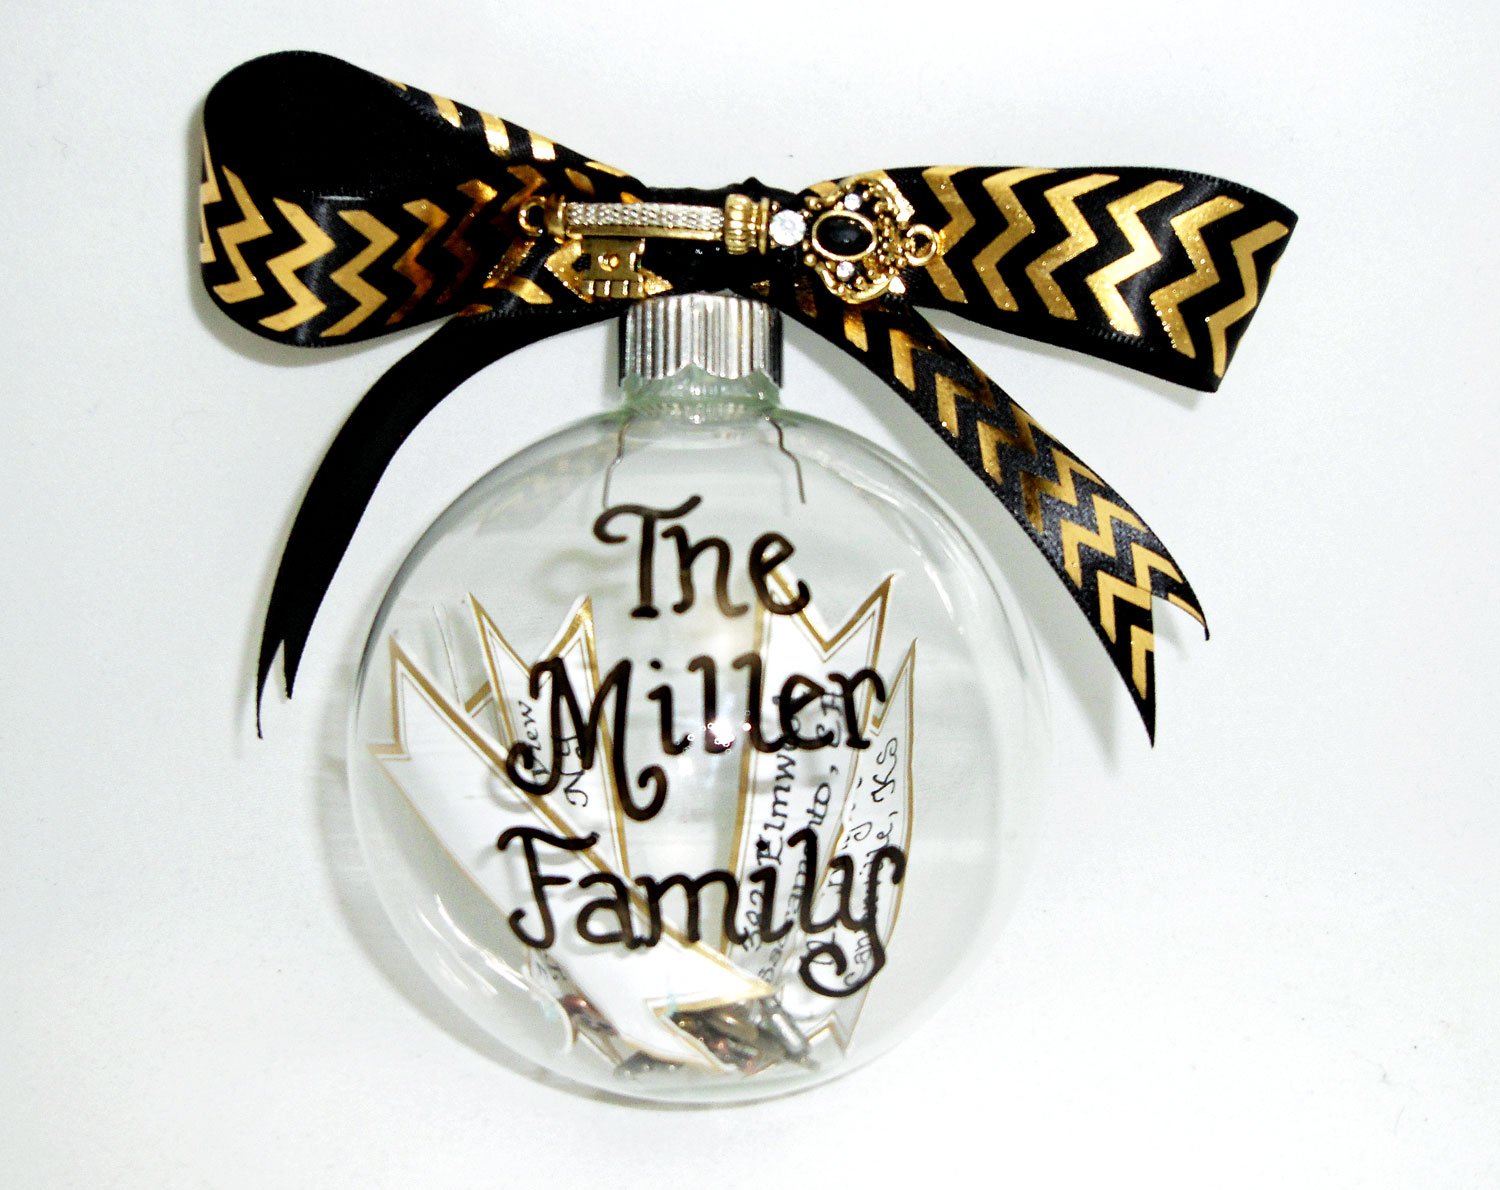 Finished DIY New Home Ornament For The Miller Family | OrnamentShop.com